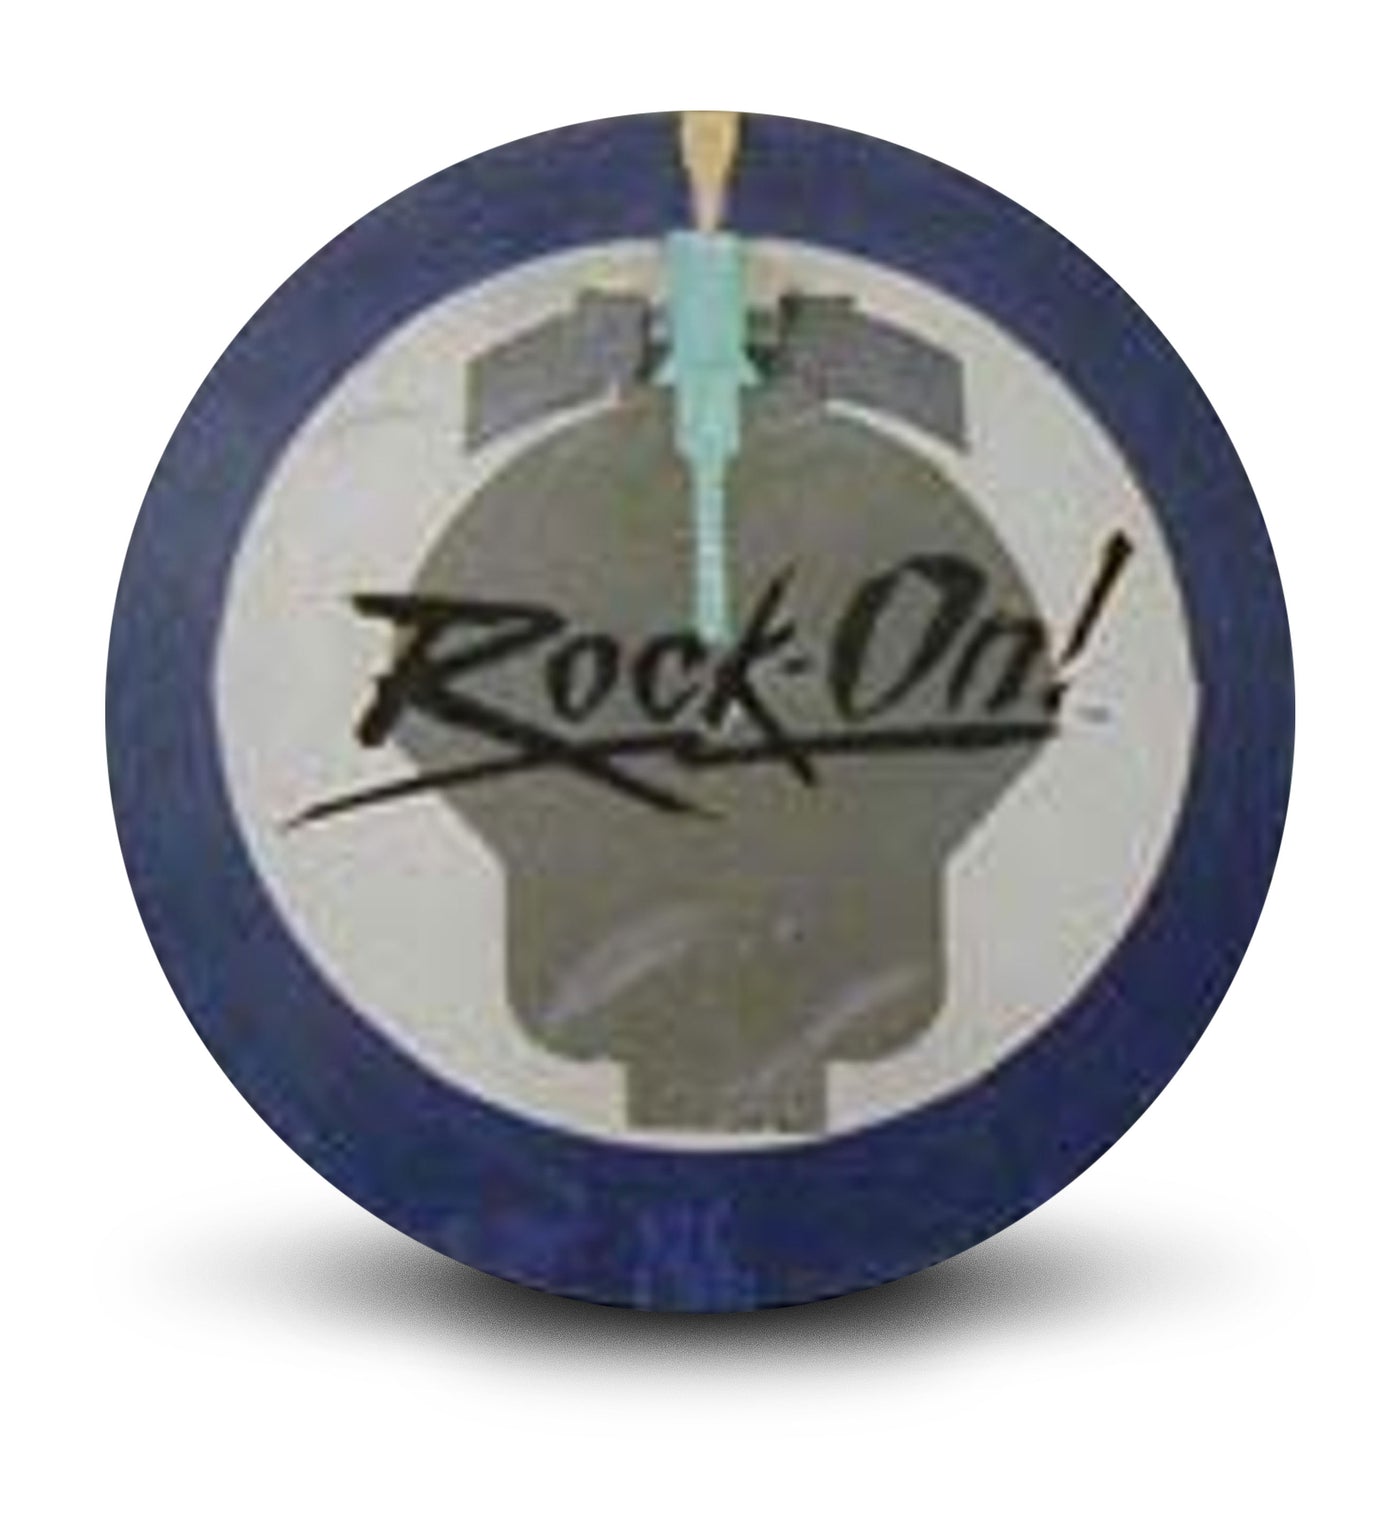 Rock On Limited Edition Bowling Ball Core